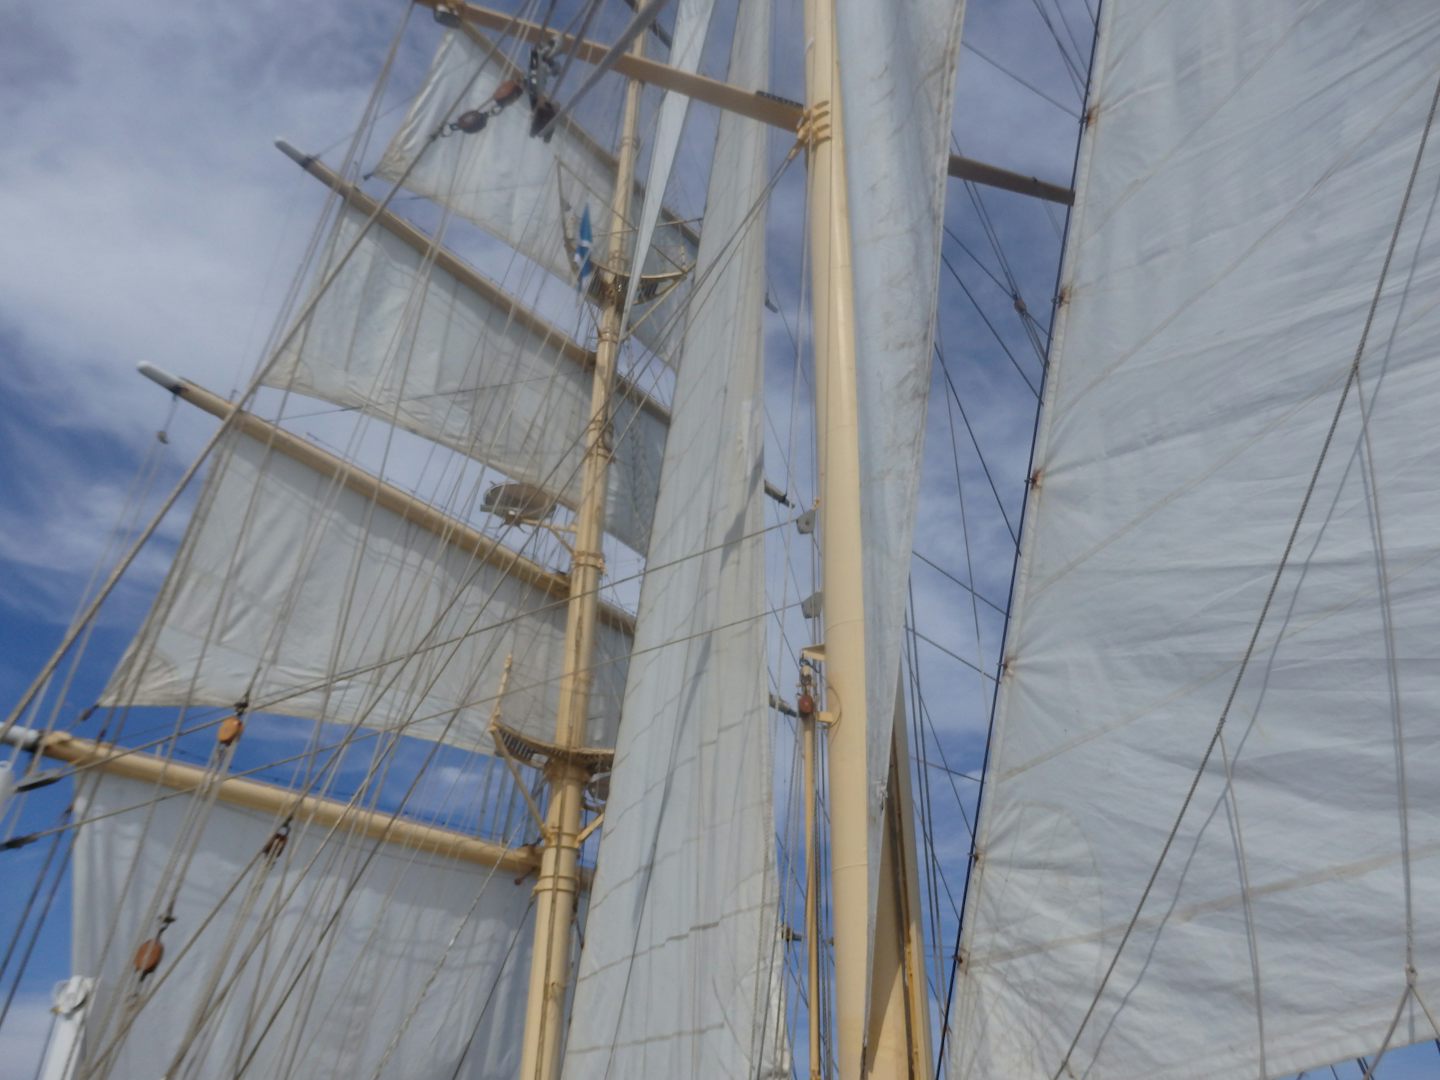 View of sails while sailing under sail power only.